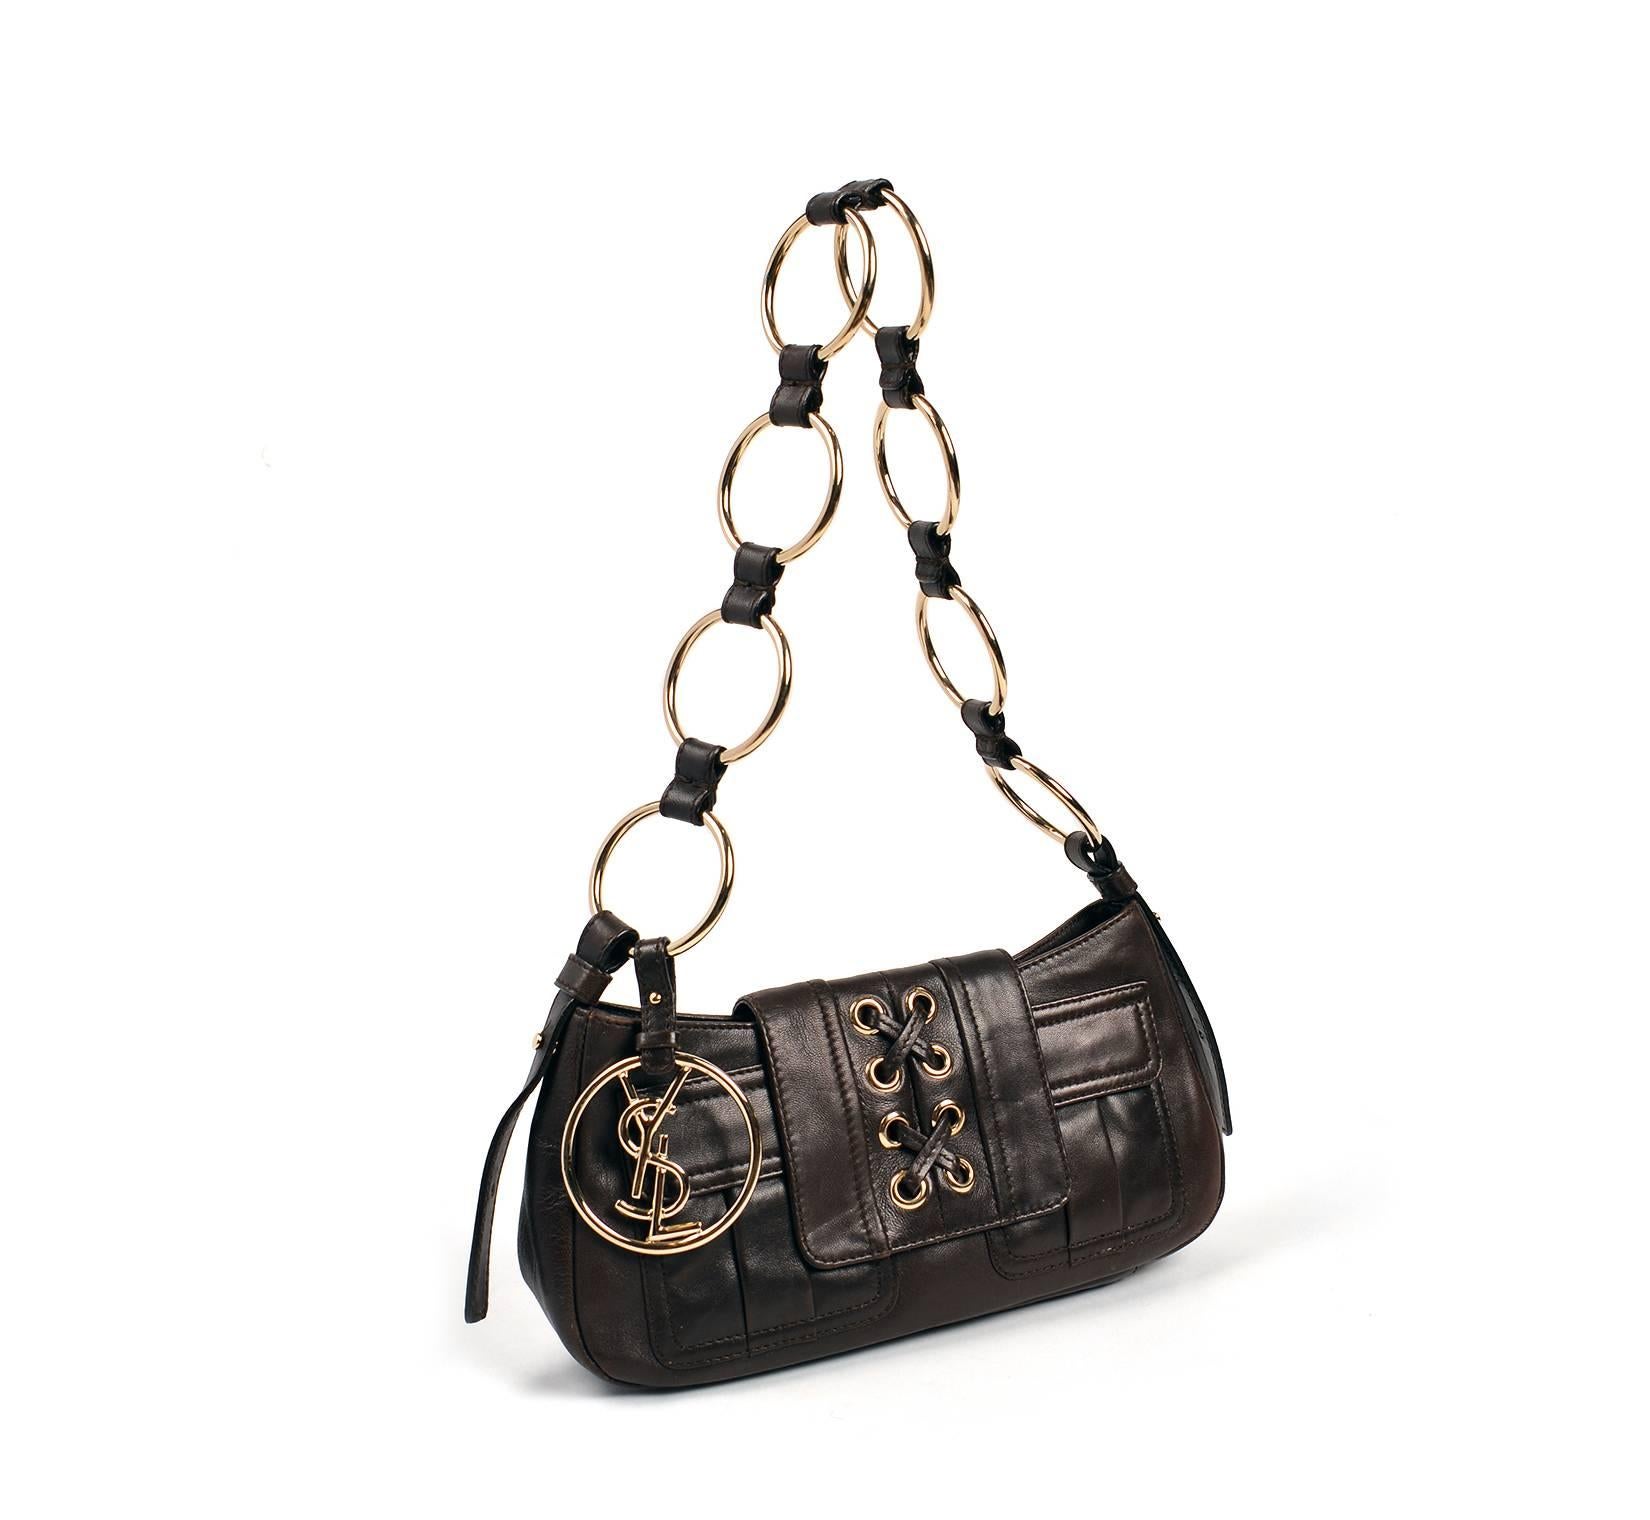  The purse is composed of soft and supple chocolate brown leather accented by silver hardware. The body of the purse features a lace-up pattern on the flap, as well as two box pleat flap pockets. The strap of the purse is composed of silver chain